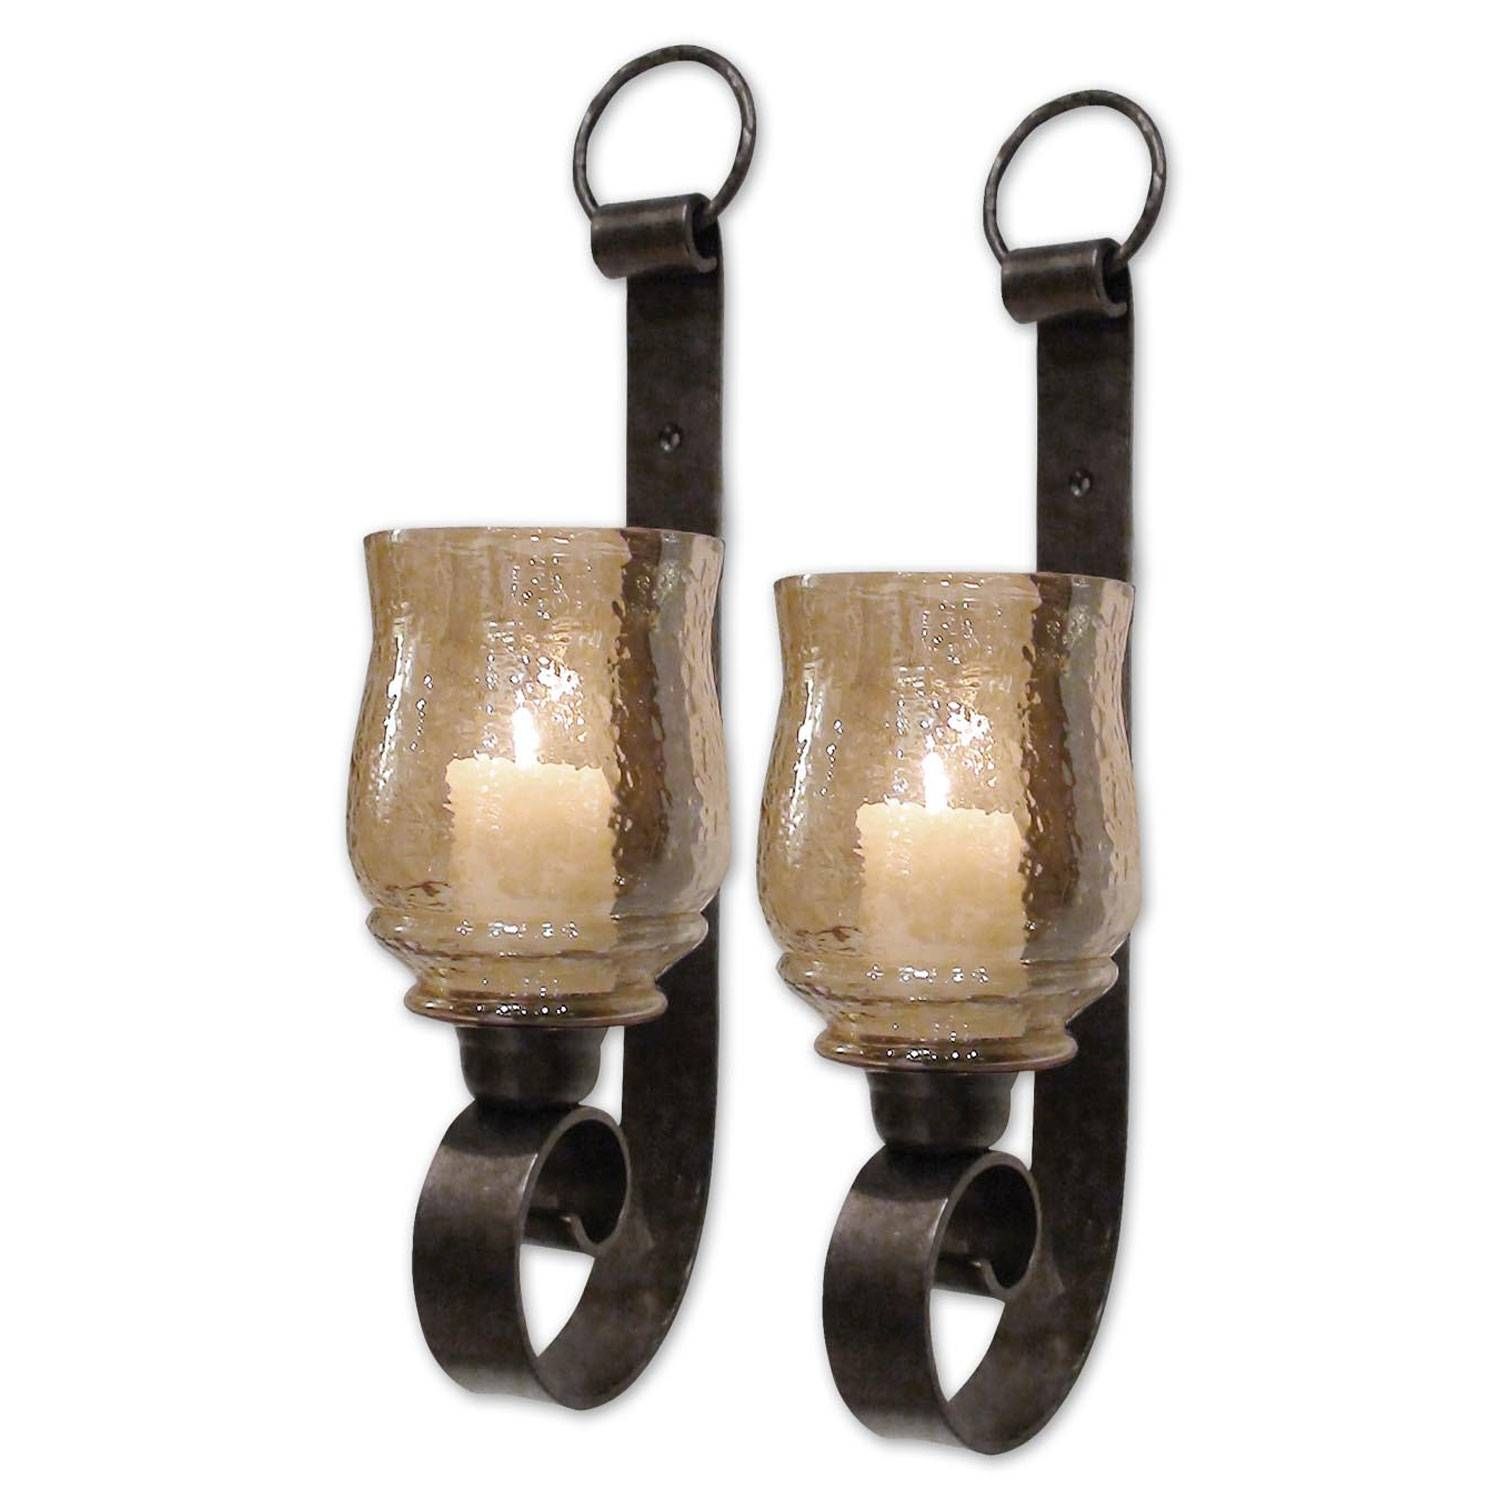 Uttermost Candle Holders | Bellacor Intended For Most Popular Metal Wall Art Candle Holder (View 3 of 20)